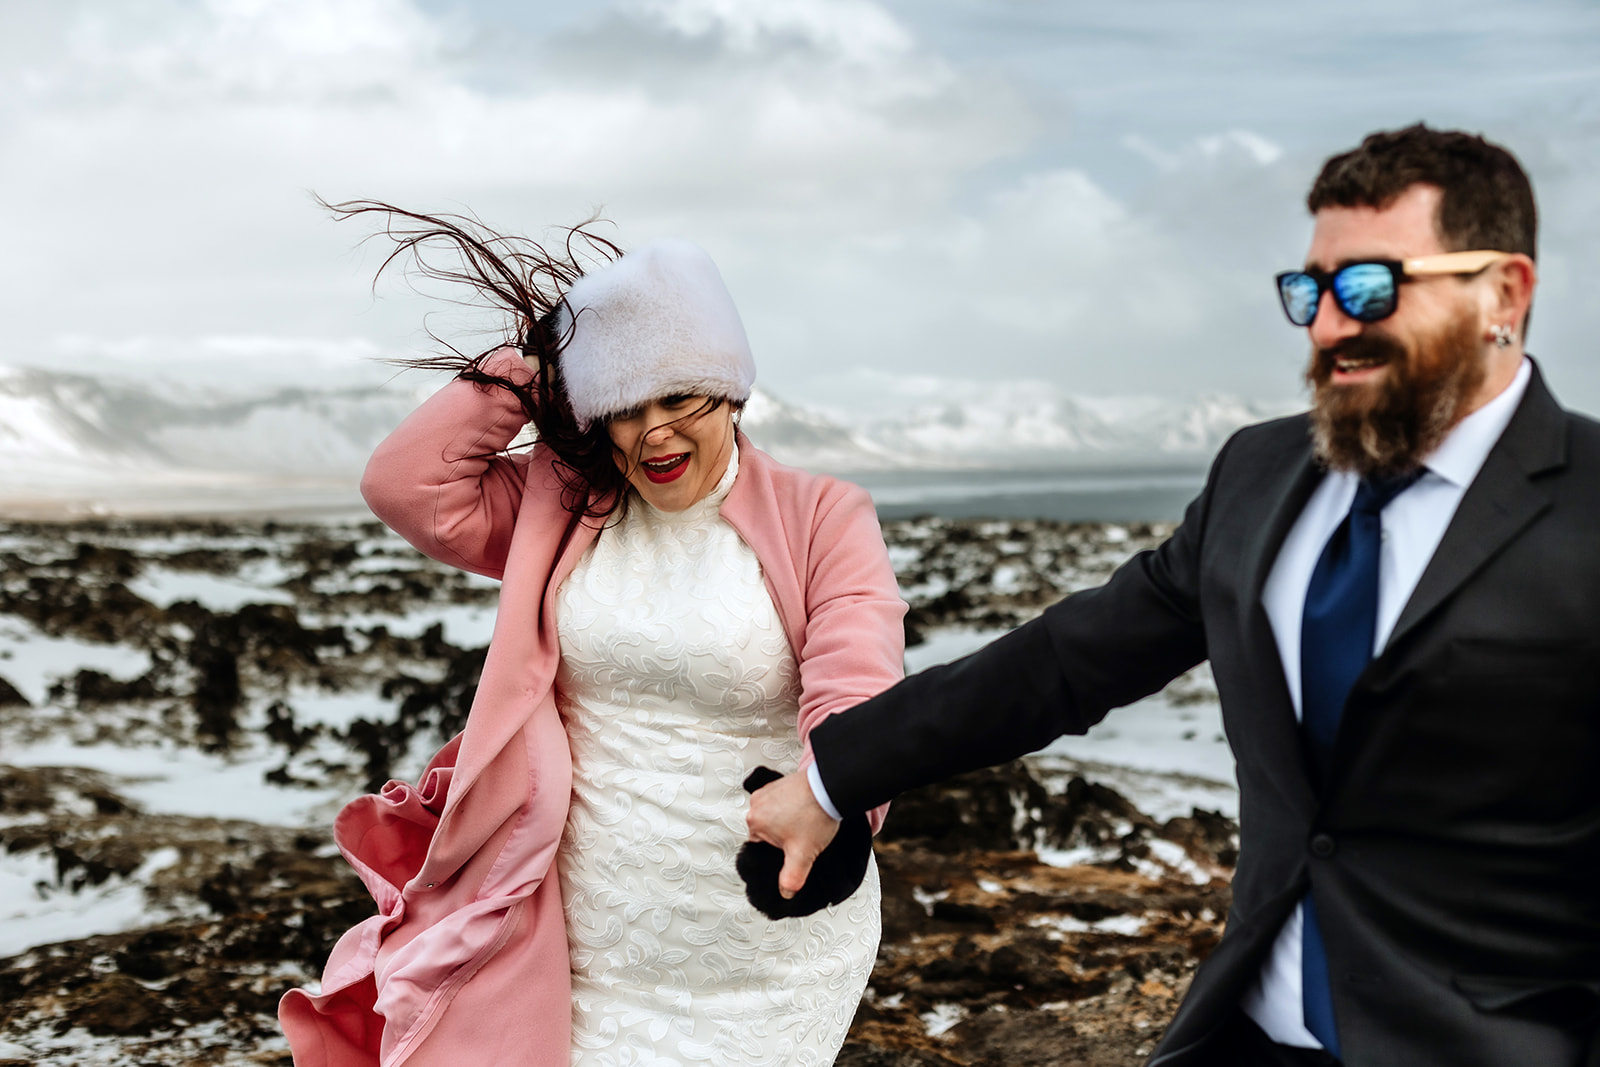 Married couple who got married in Iceland are standing on top of a mountain and surrounded by snow and mountains